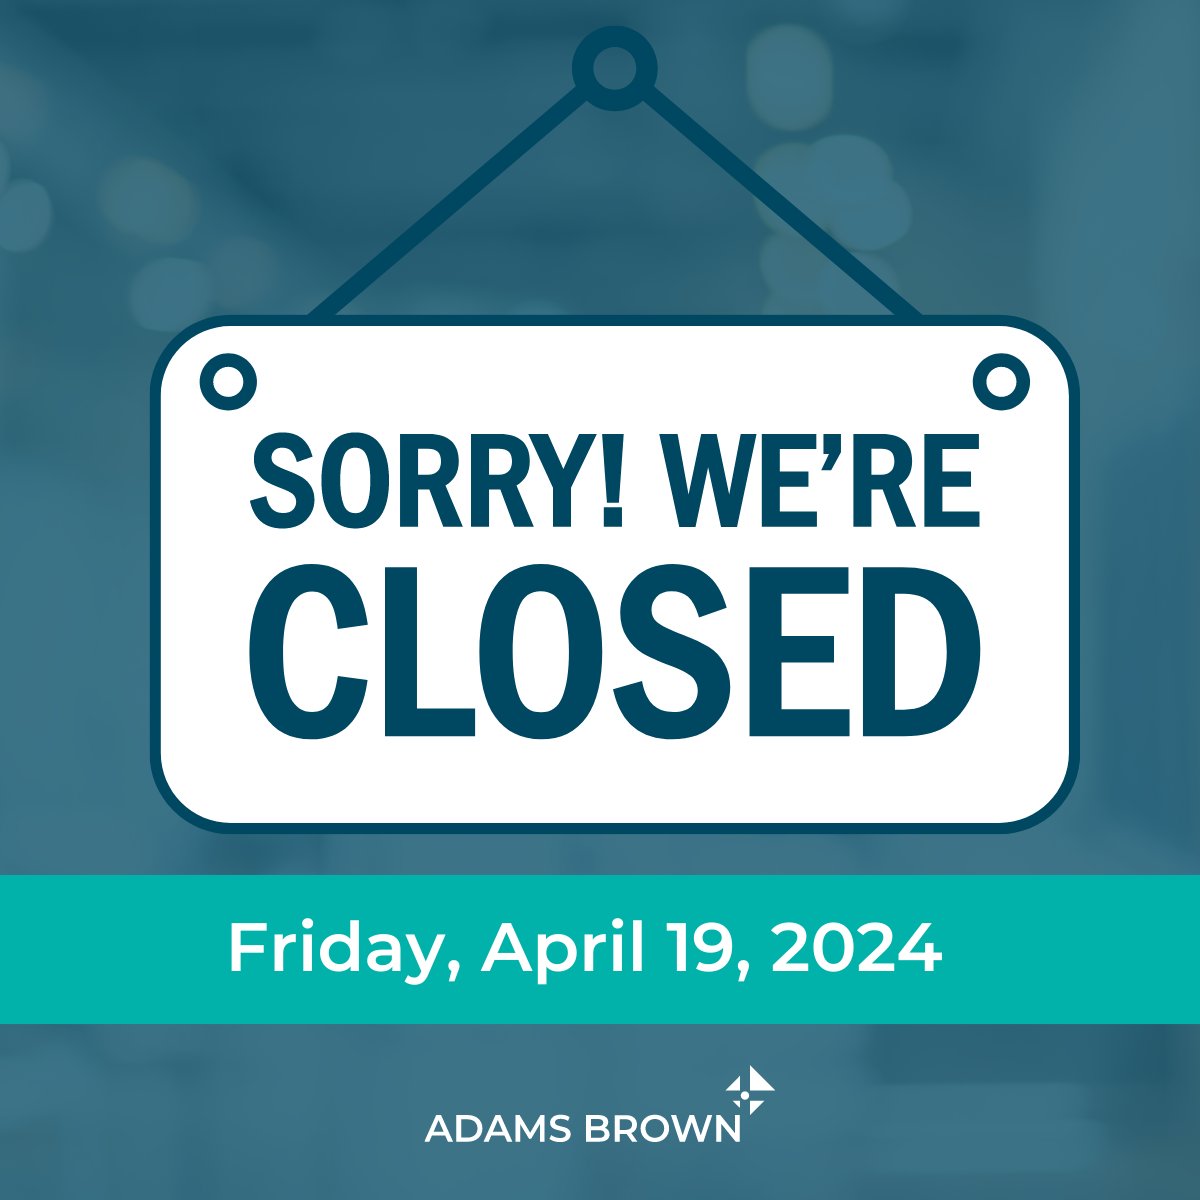 Our offices are closed today to allow our team some very much deserved time off after a busy tax season. We will be back on Monday!

#taxseason #AccountingandAccountants #WorkWithAdamsBrown